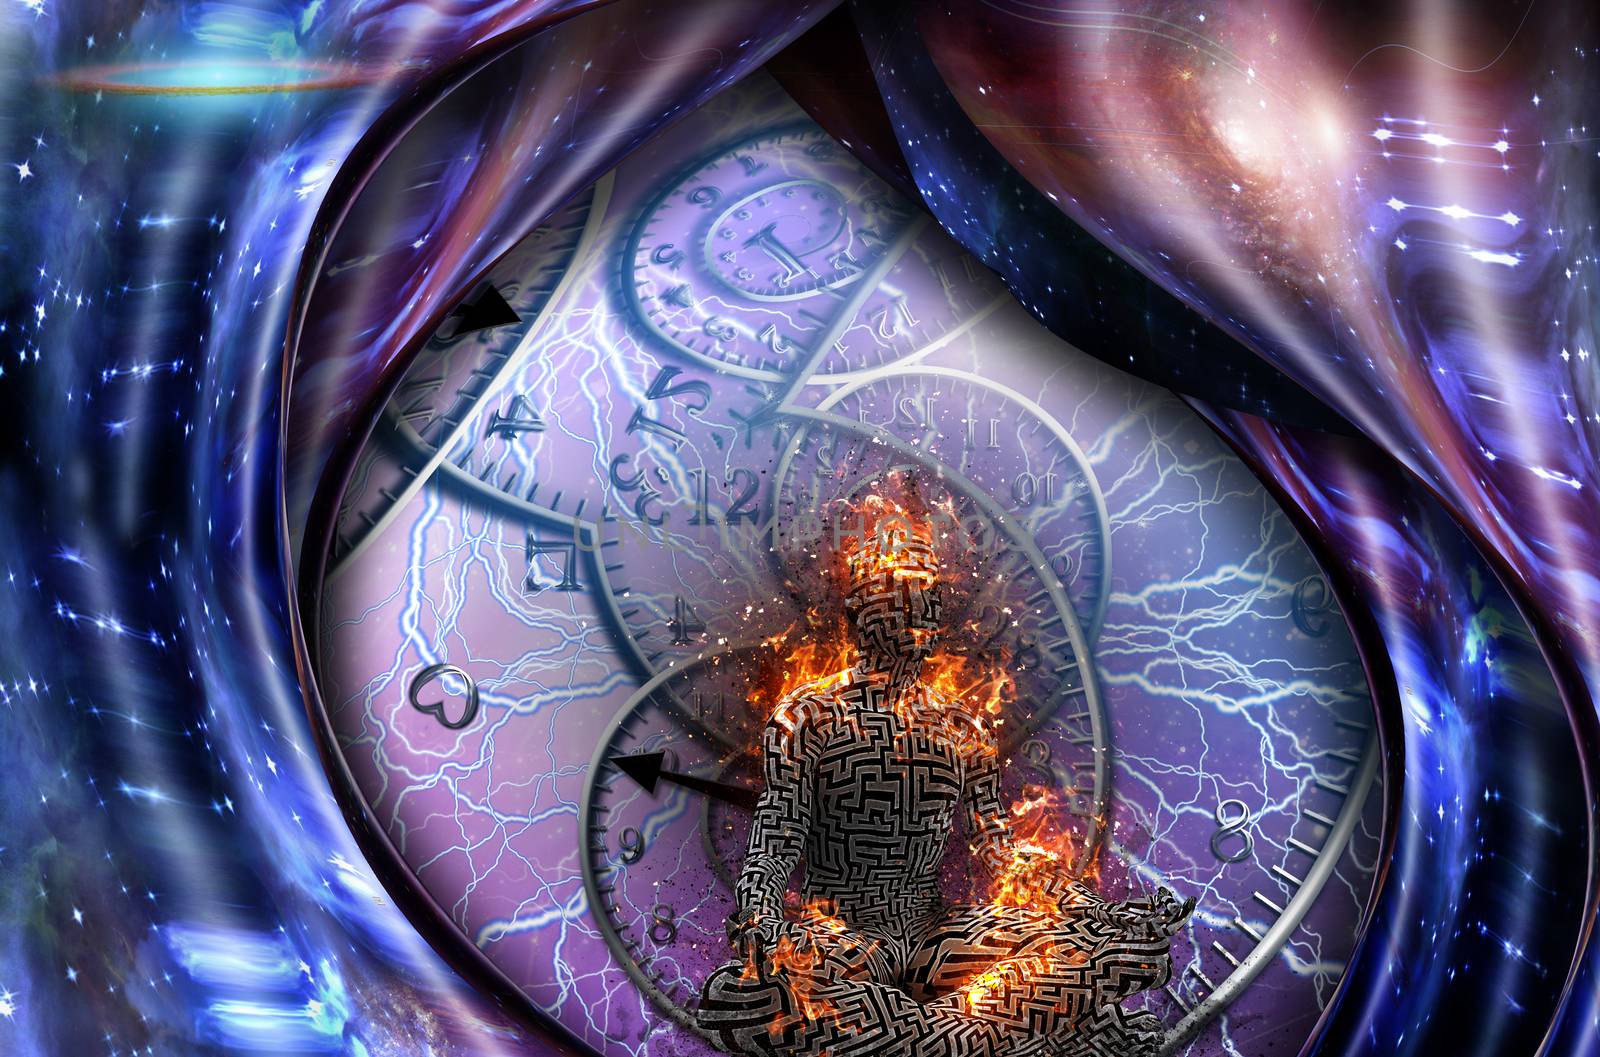 Surrealism. Figure of man in lotus pose in flames. Spirals of time and warped space